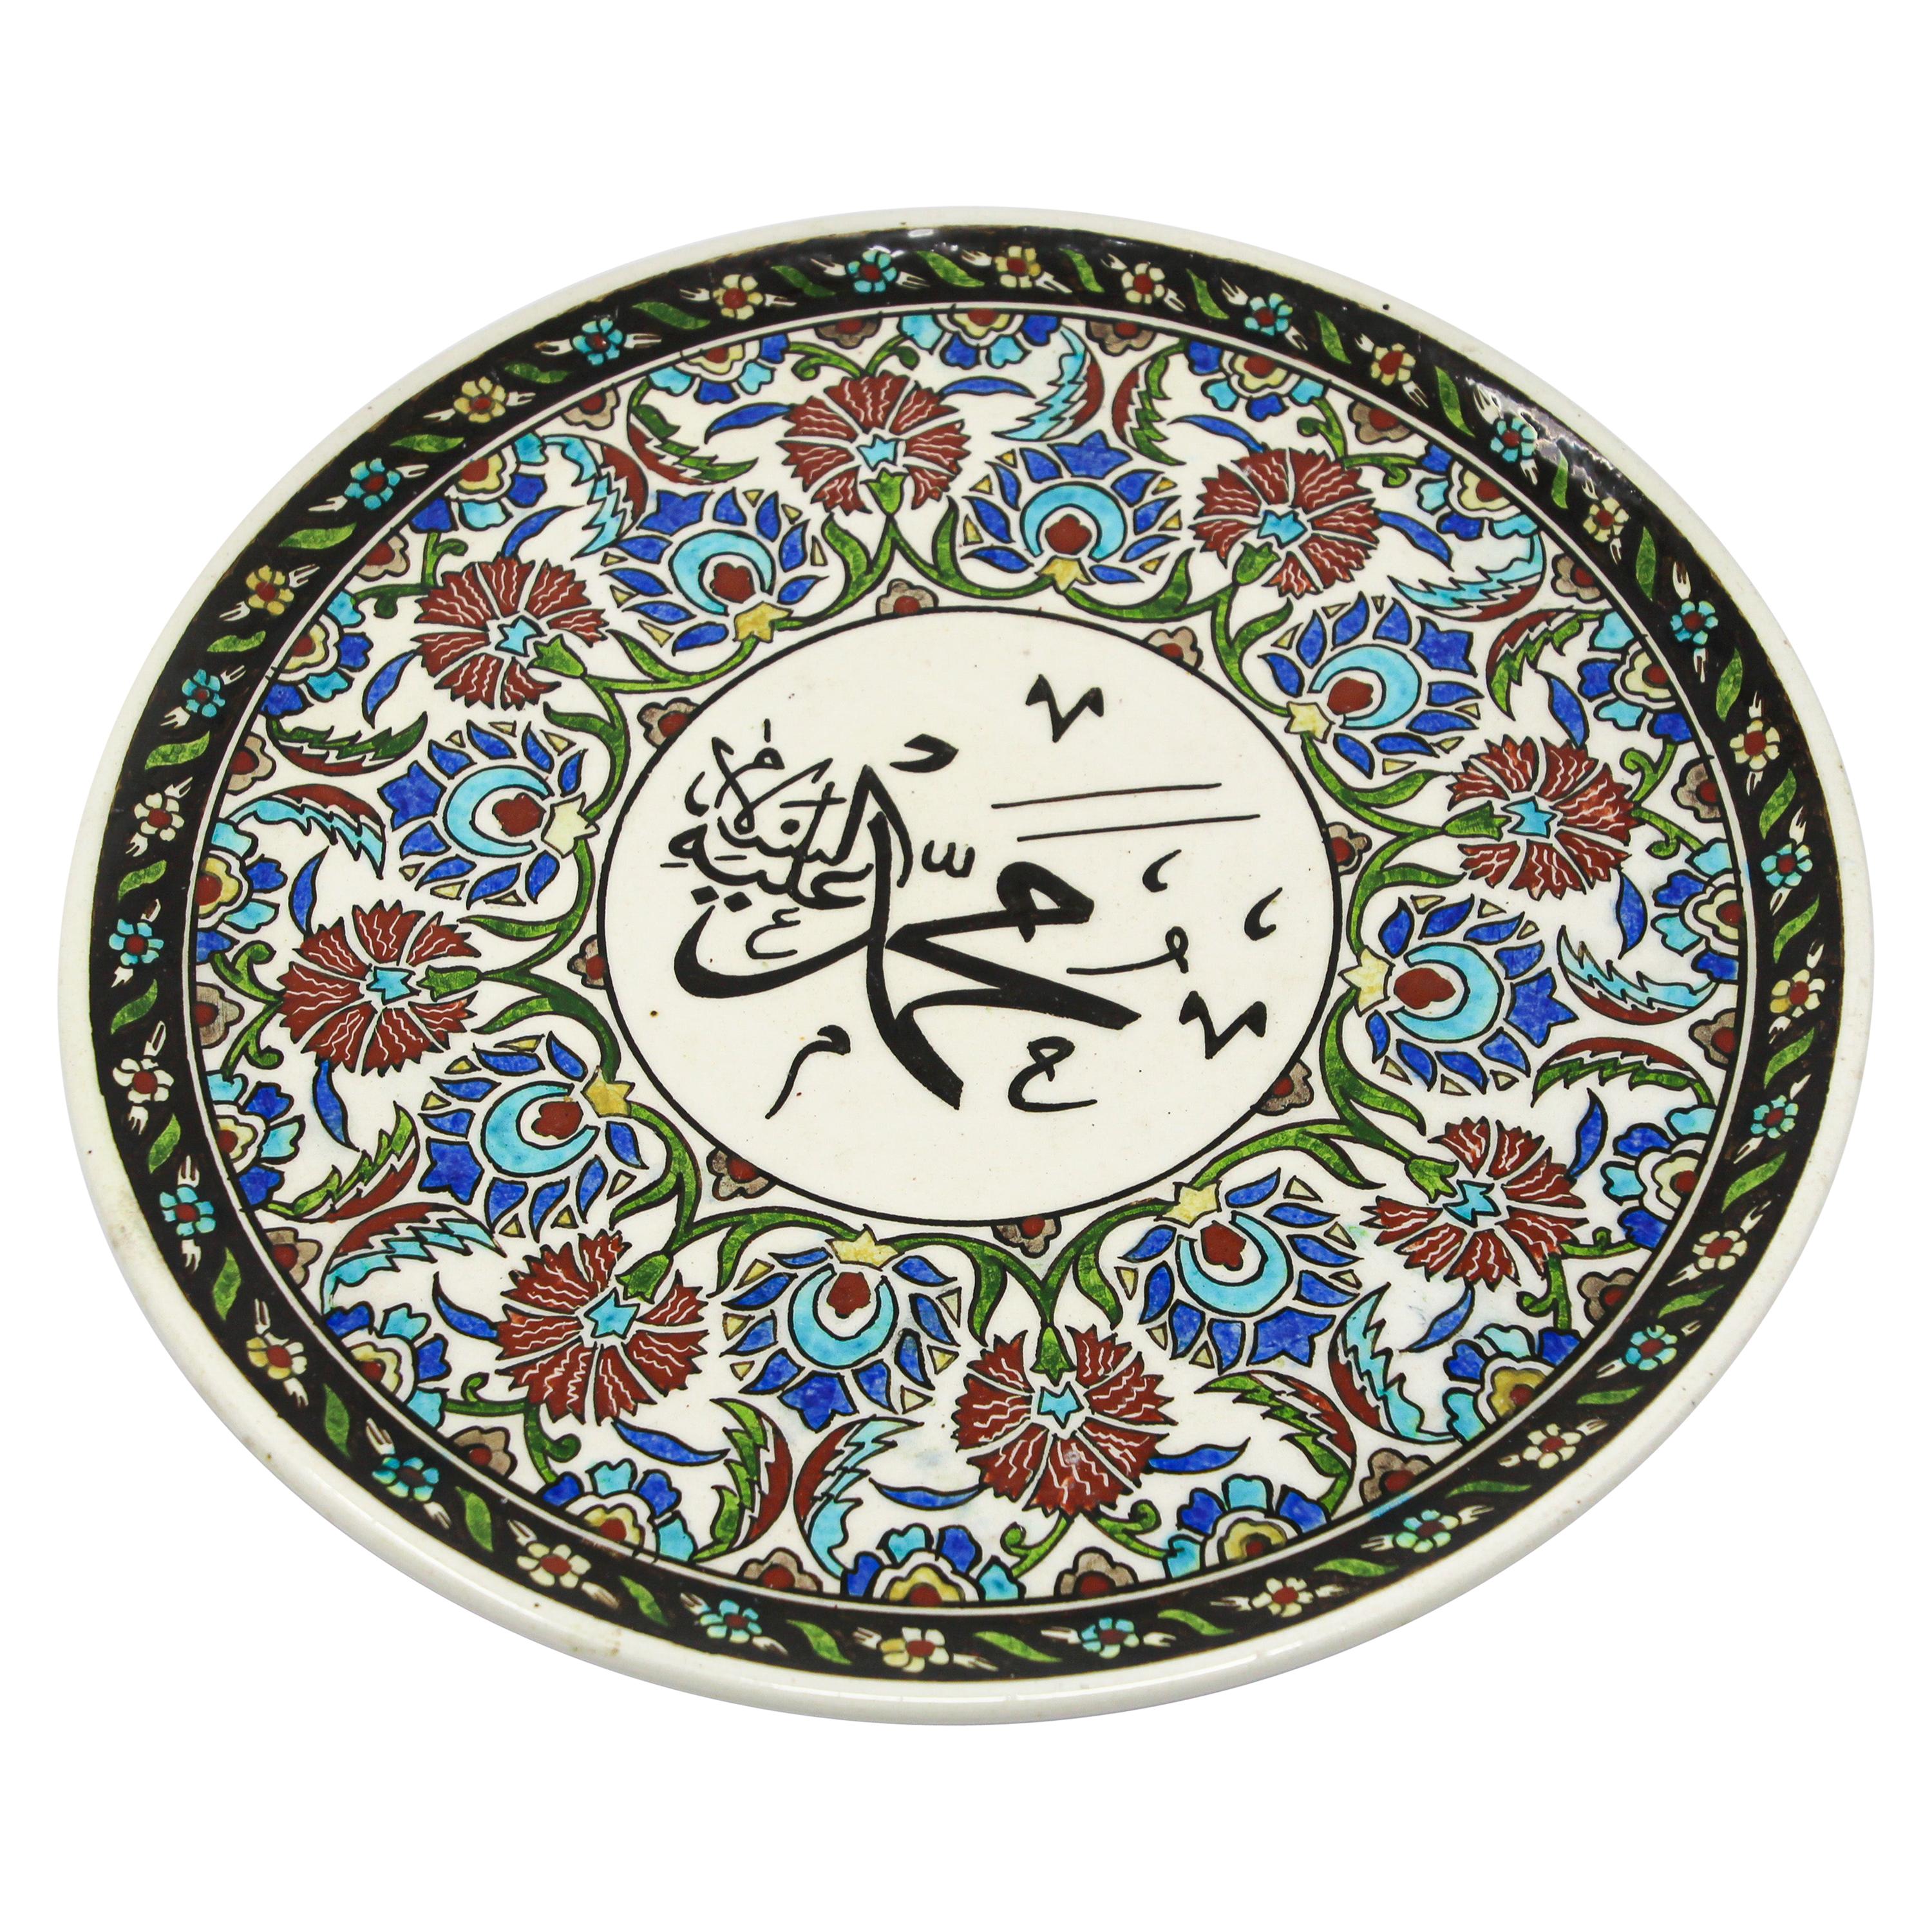 Hand Painted Polychrome TurkishCeramic Decorative Plate with Islamic Calligraphy